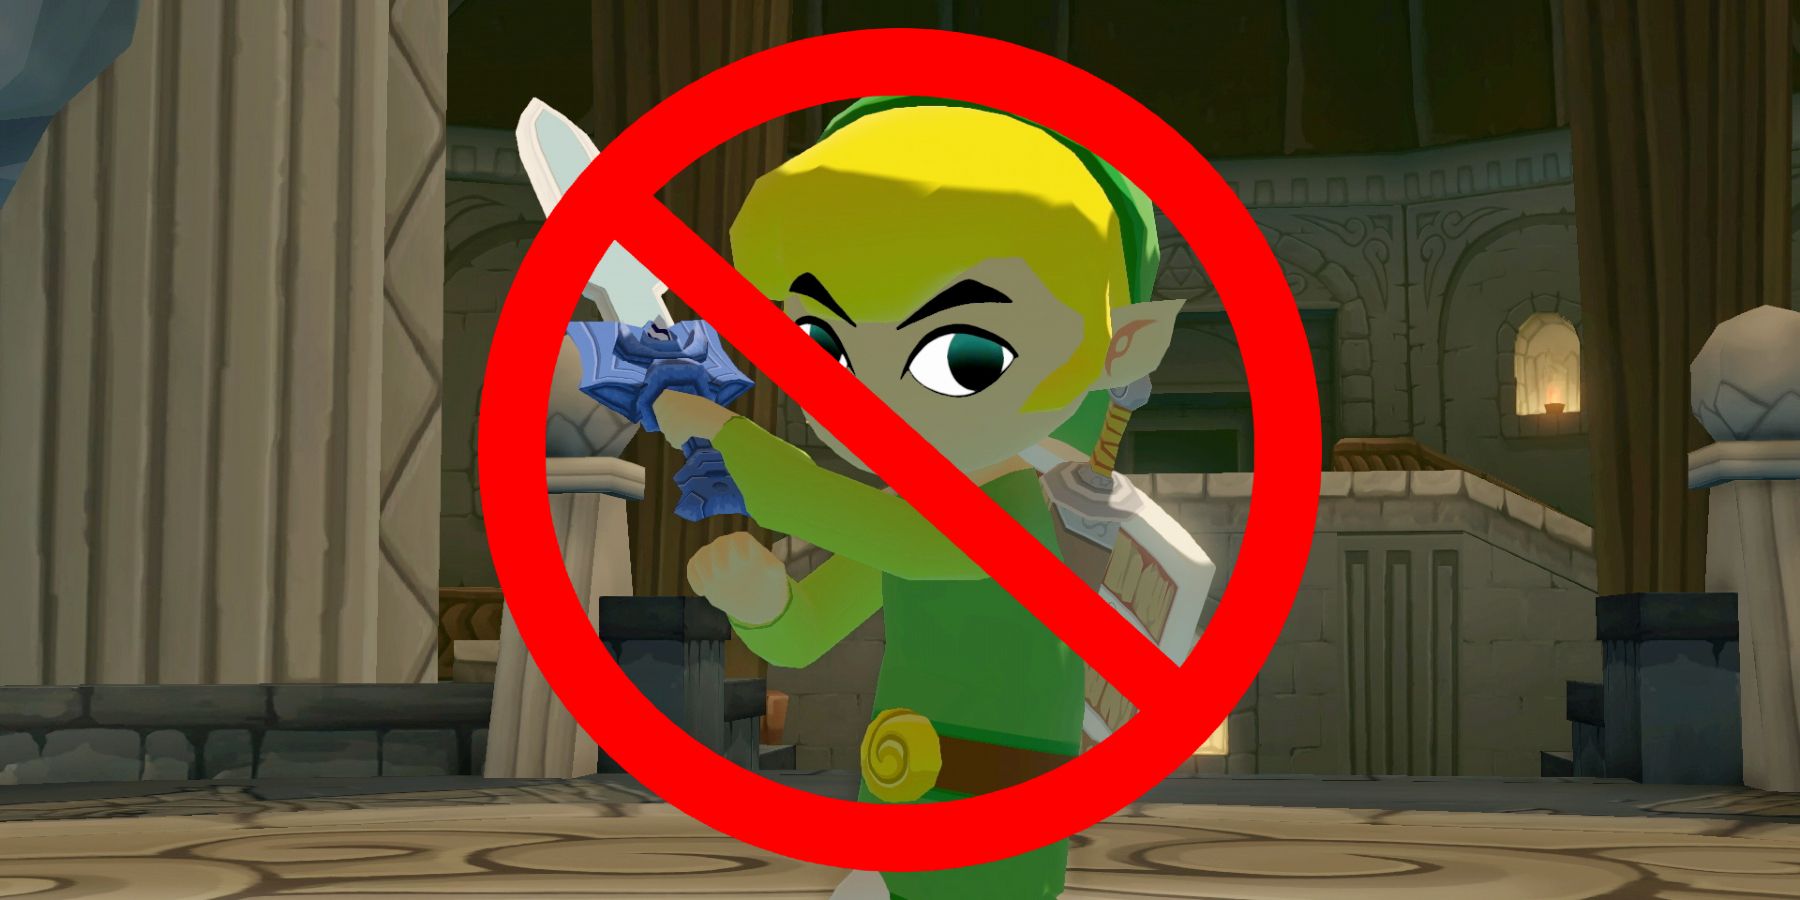 Why Is It Called The Legend Of Zelda When Link Is The Main Character?